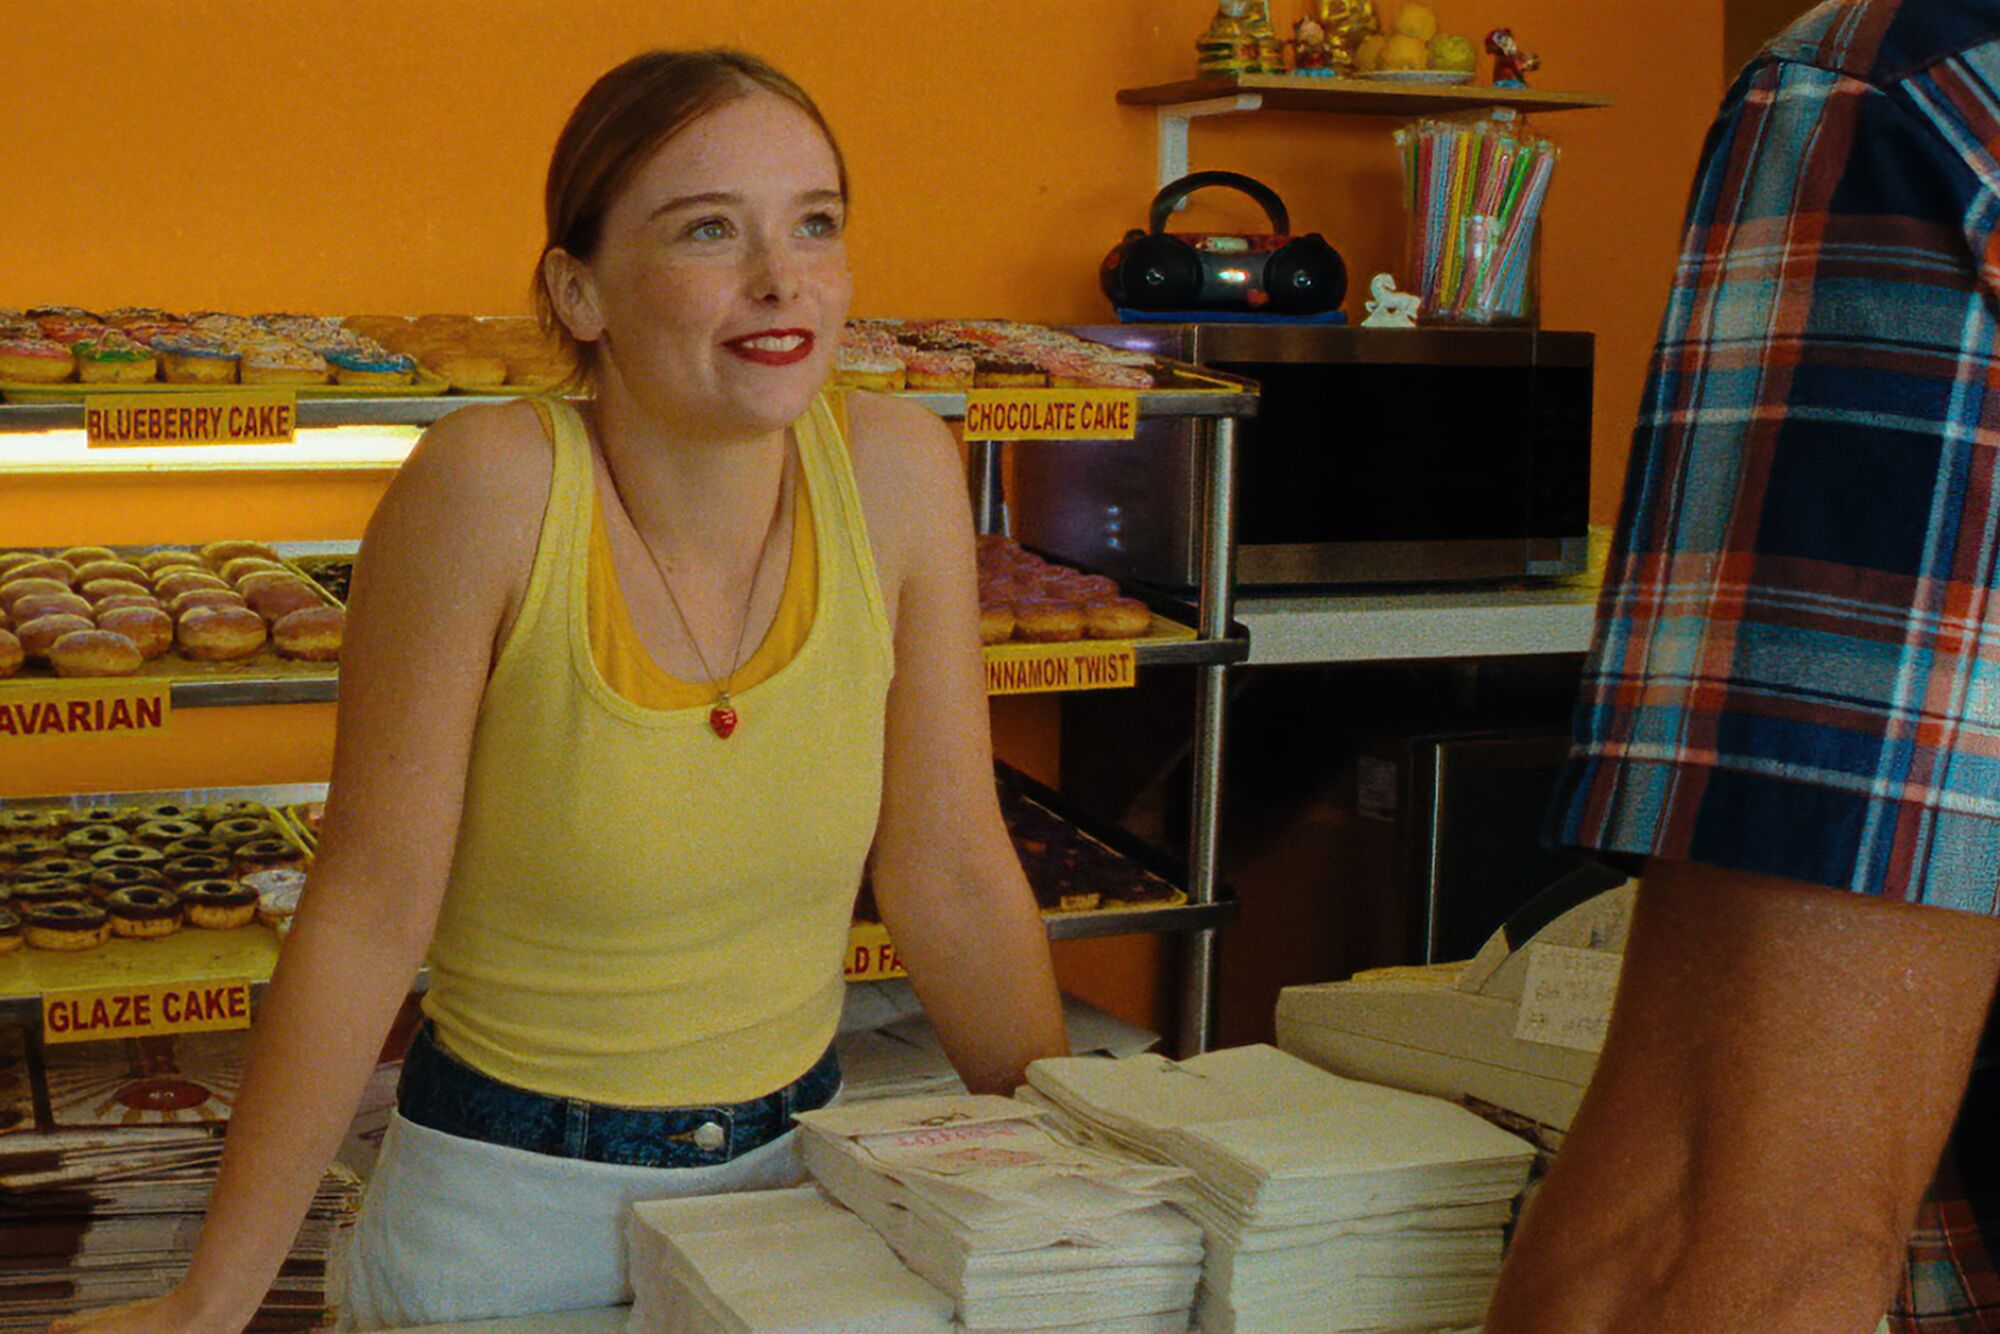 A woman in a yellow shirt smiles at a man as she stands behind the counter of a doughnut shop.